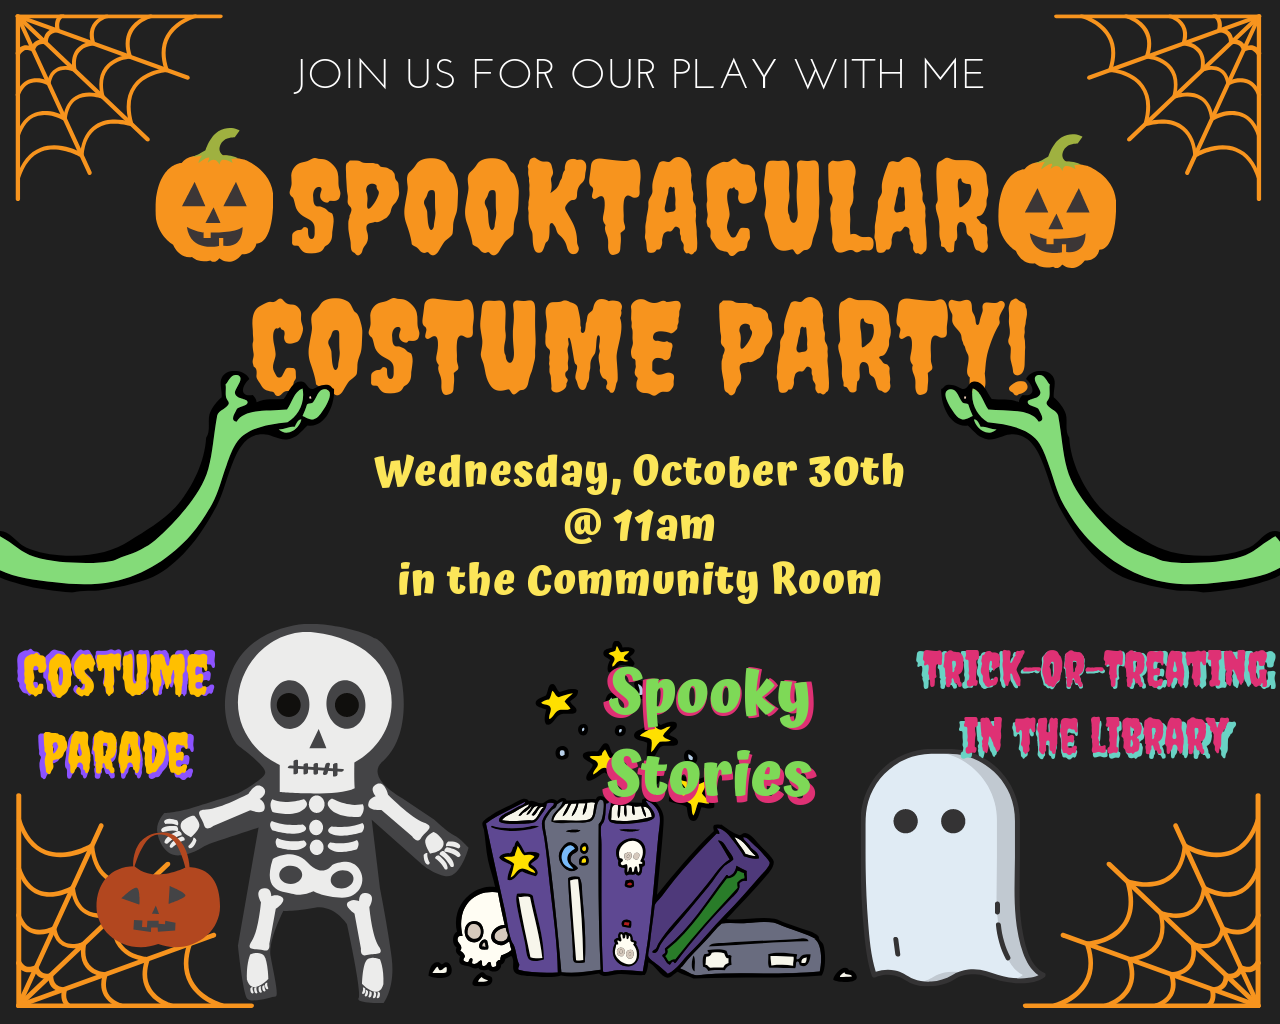 spooktacular costume party for ages 0-5